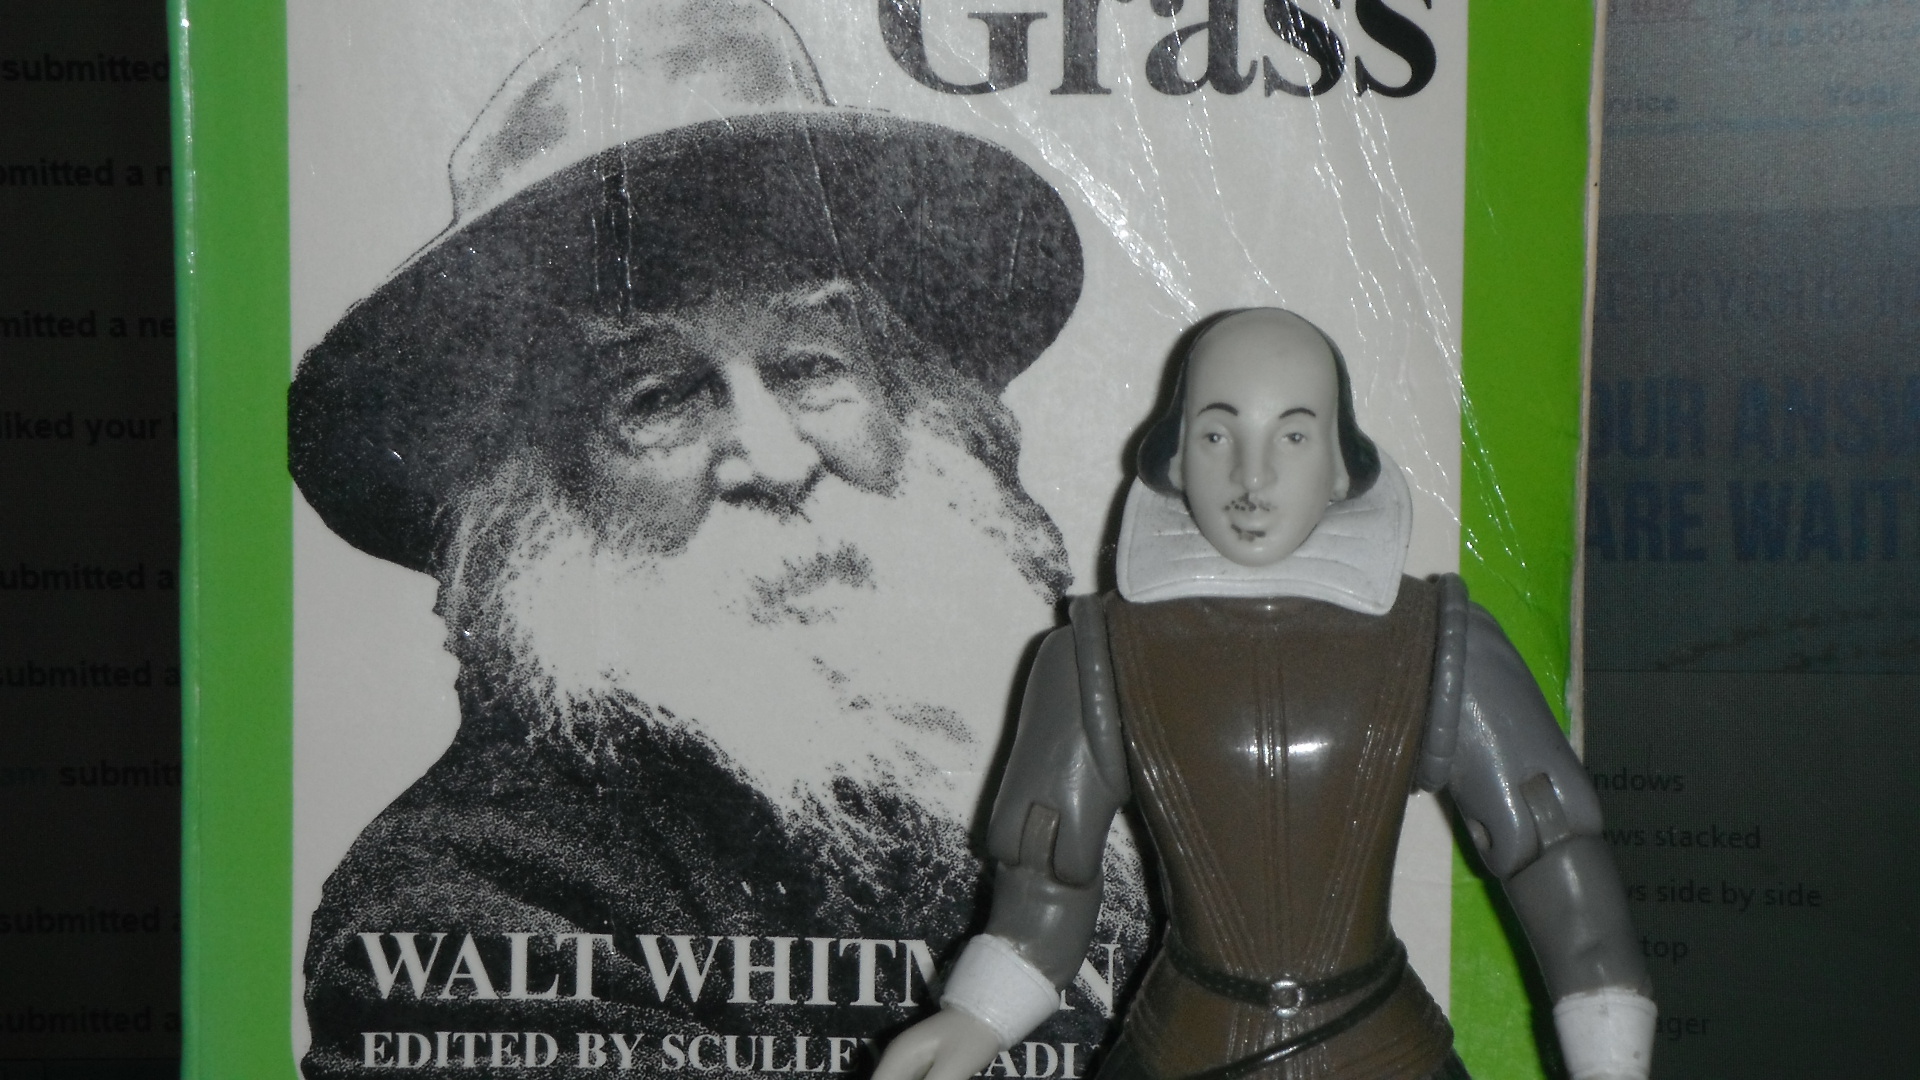 Photo taken by me – Whitman And Shakespeare 